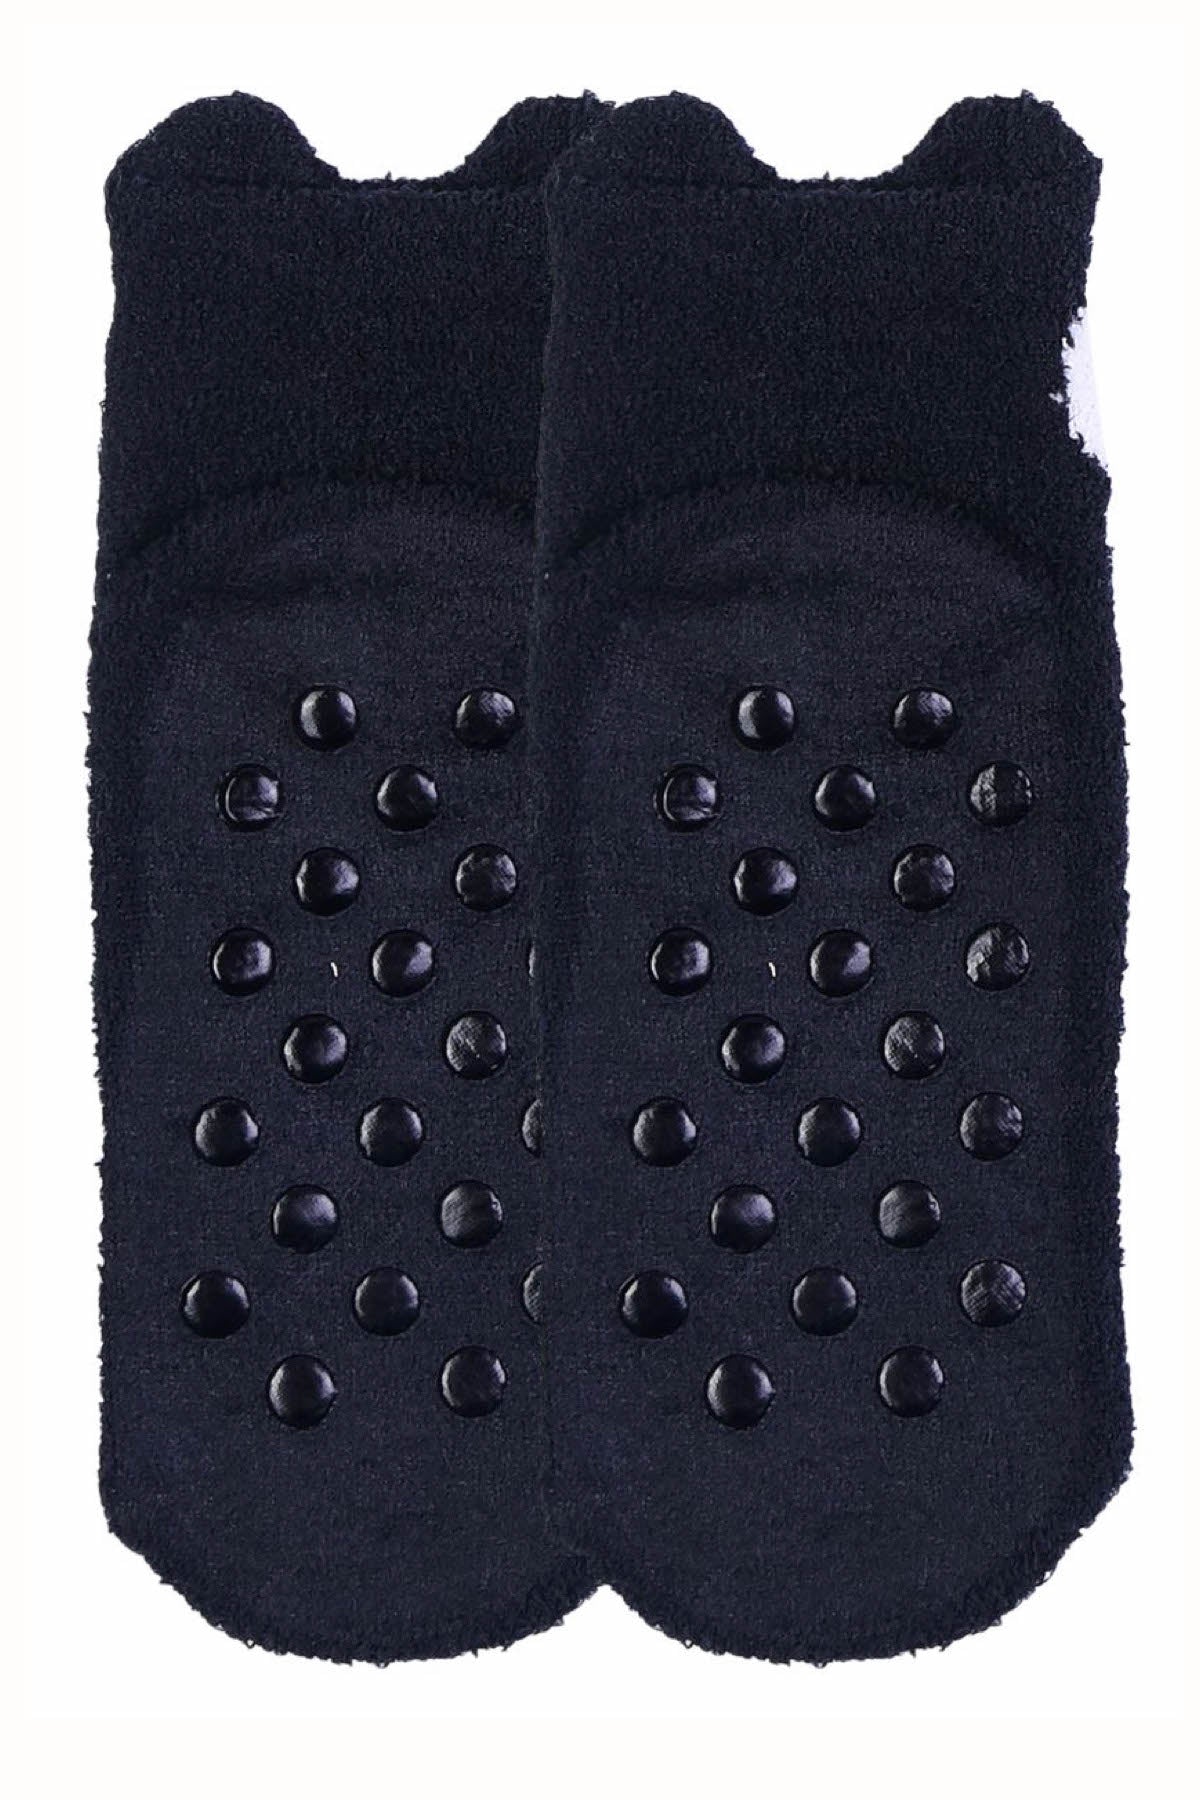 Sofra Black Panda Cozy Picot Ankle Socks with Grippers